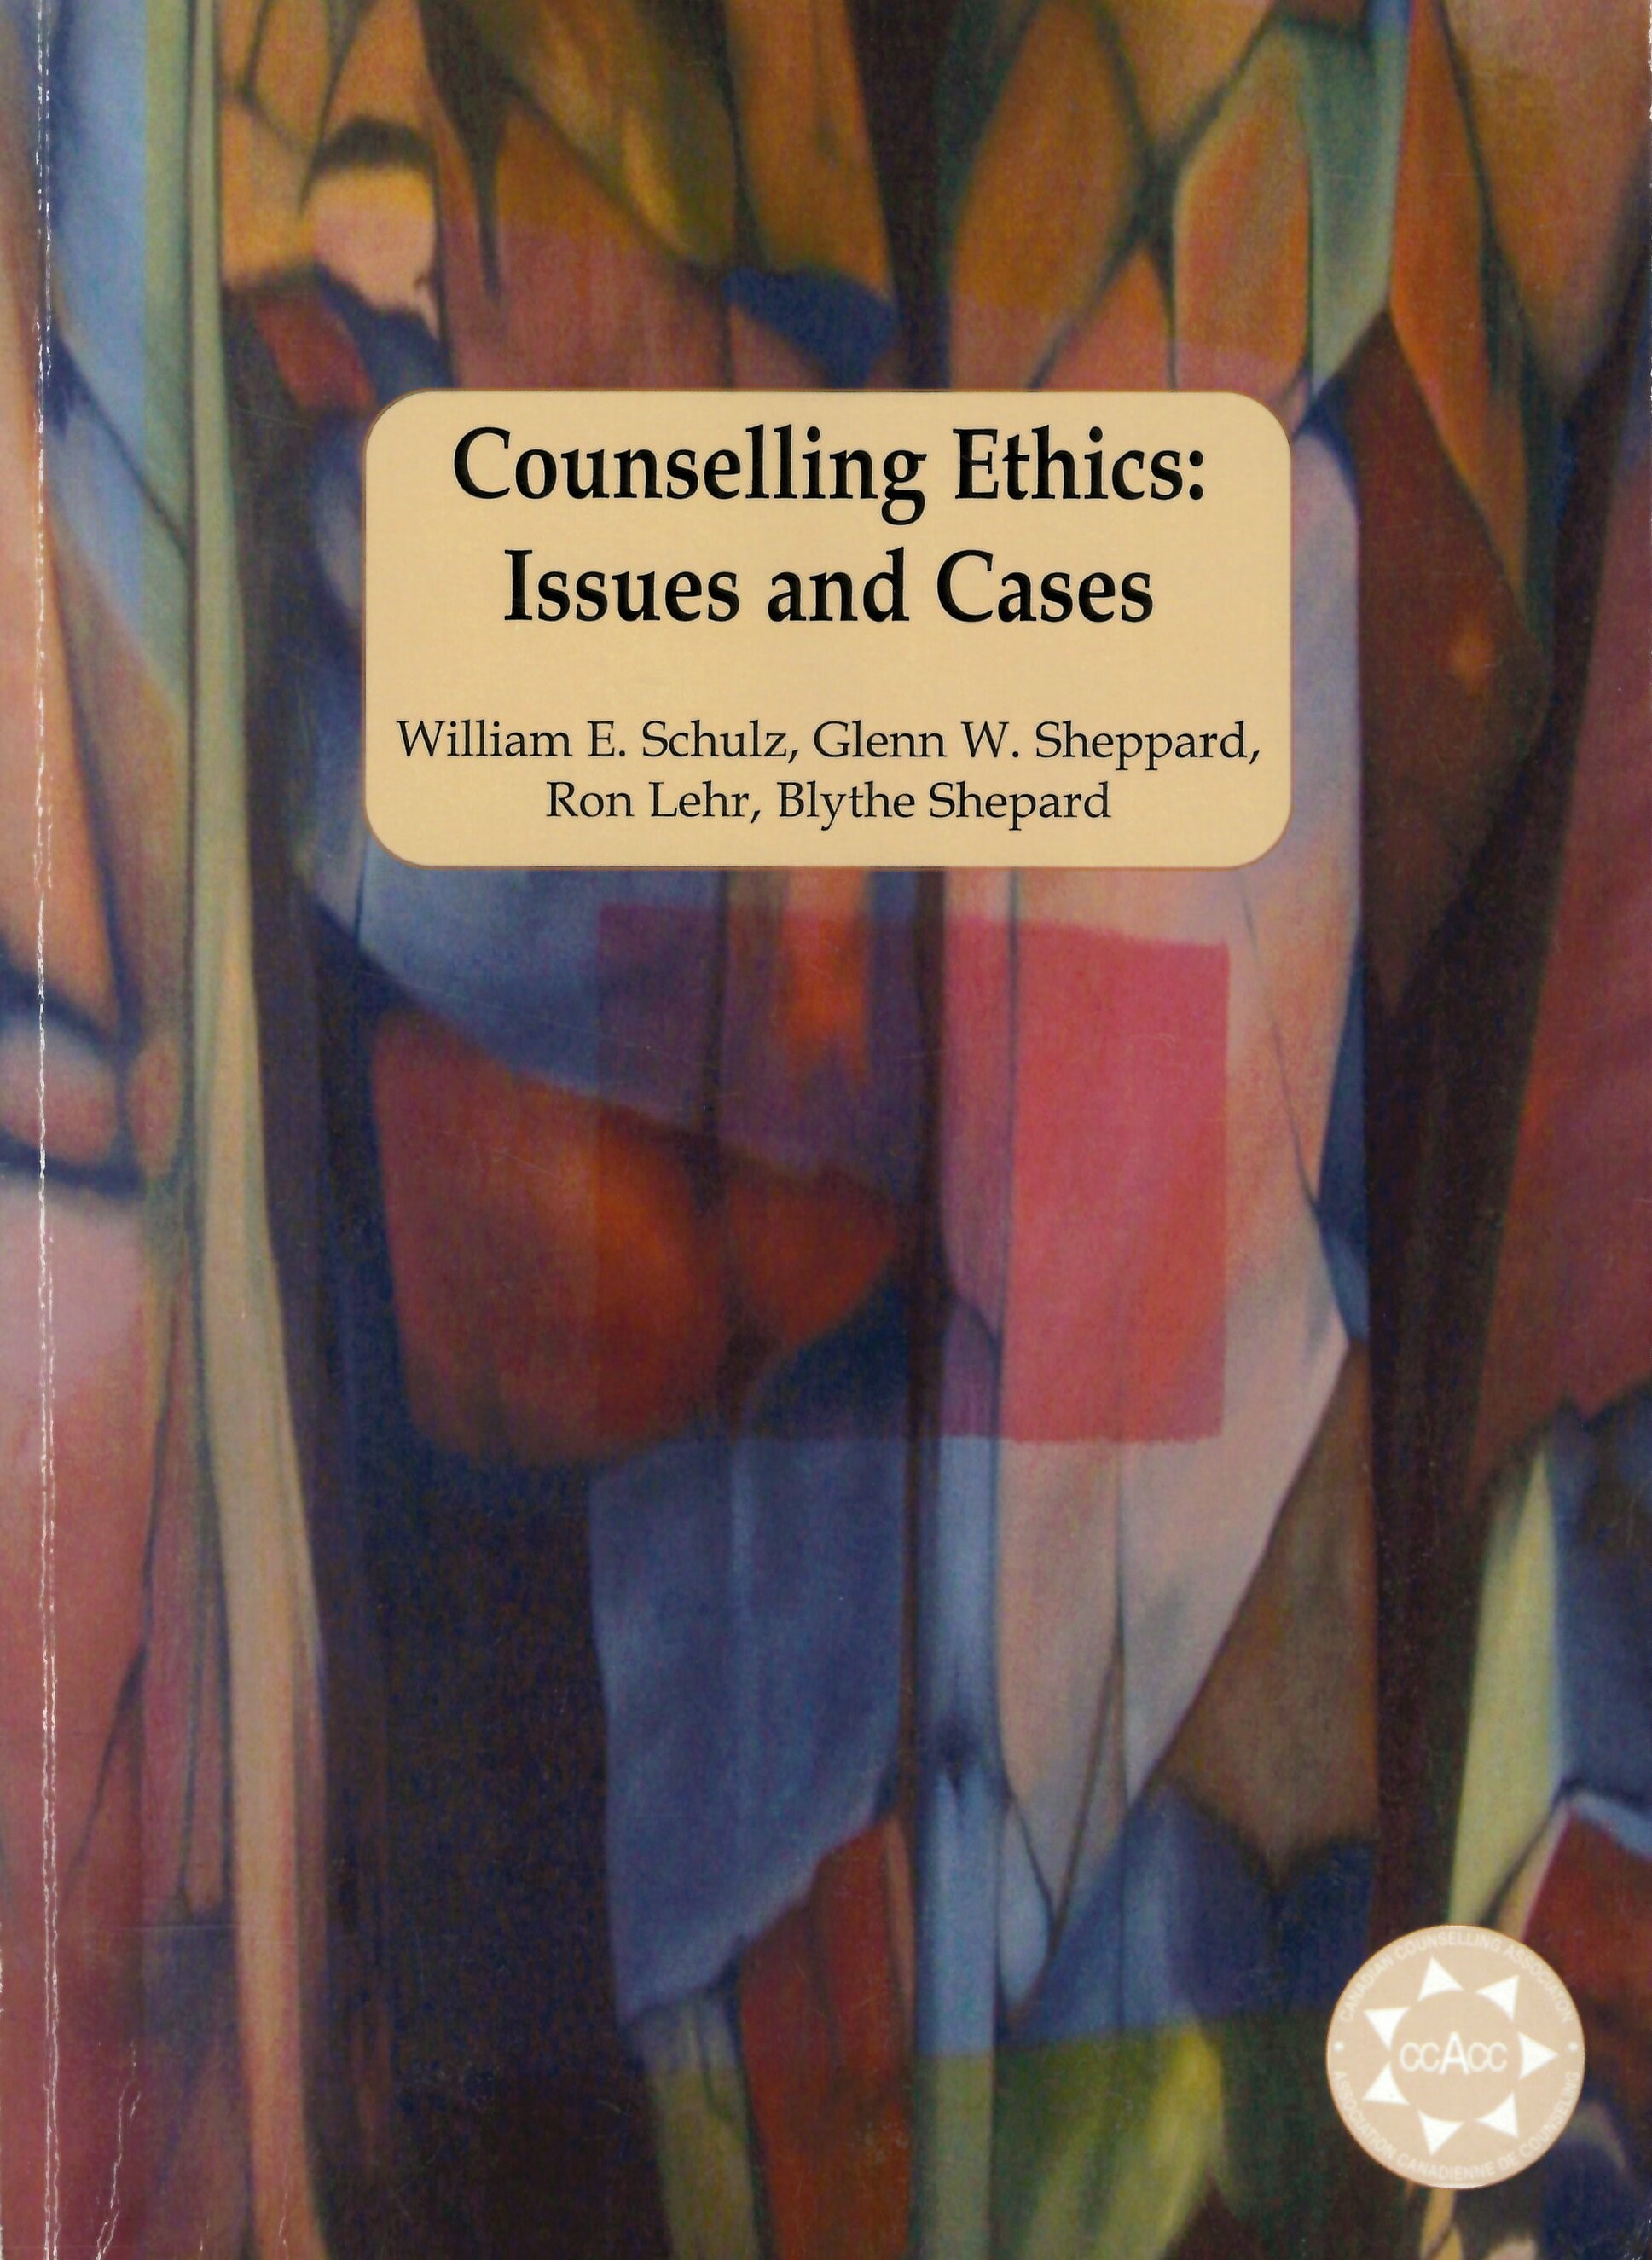 Counselling ethics : issues and cases